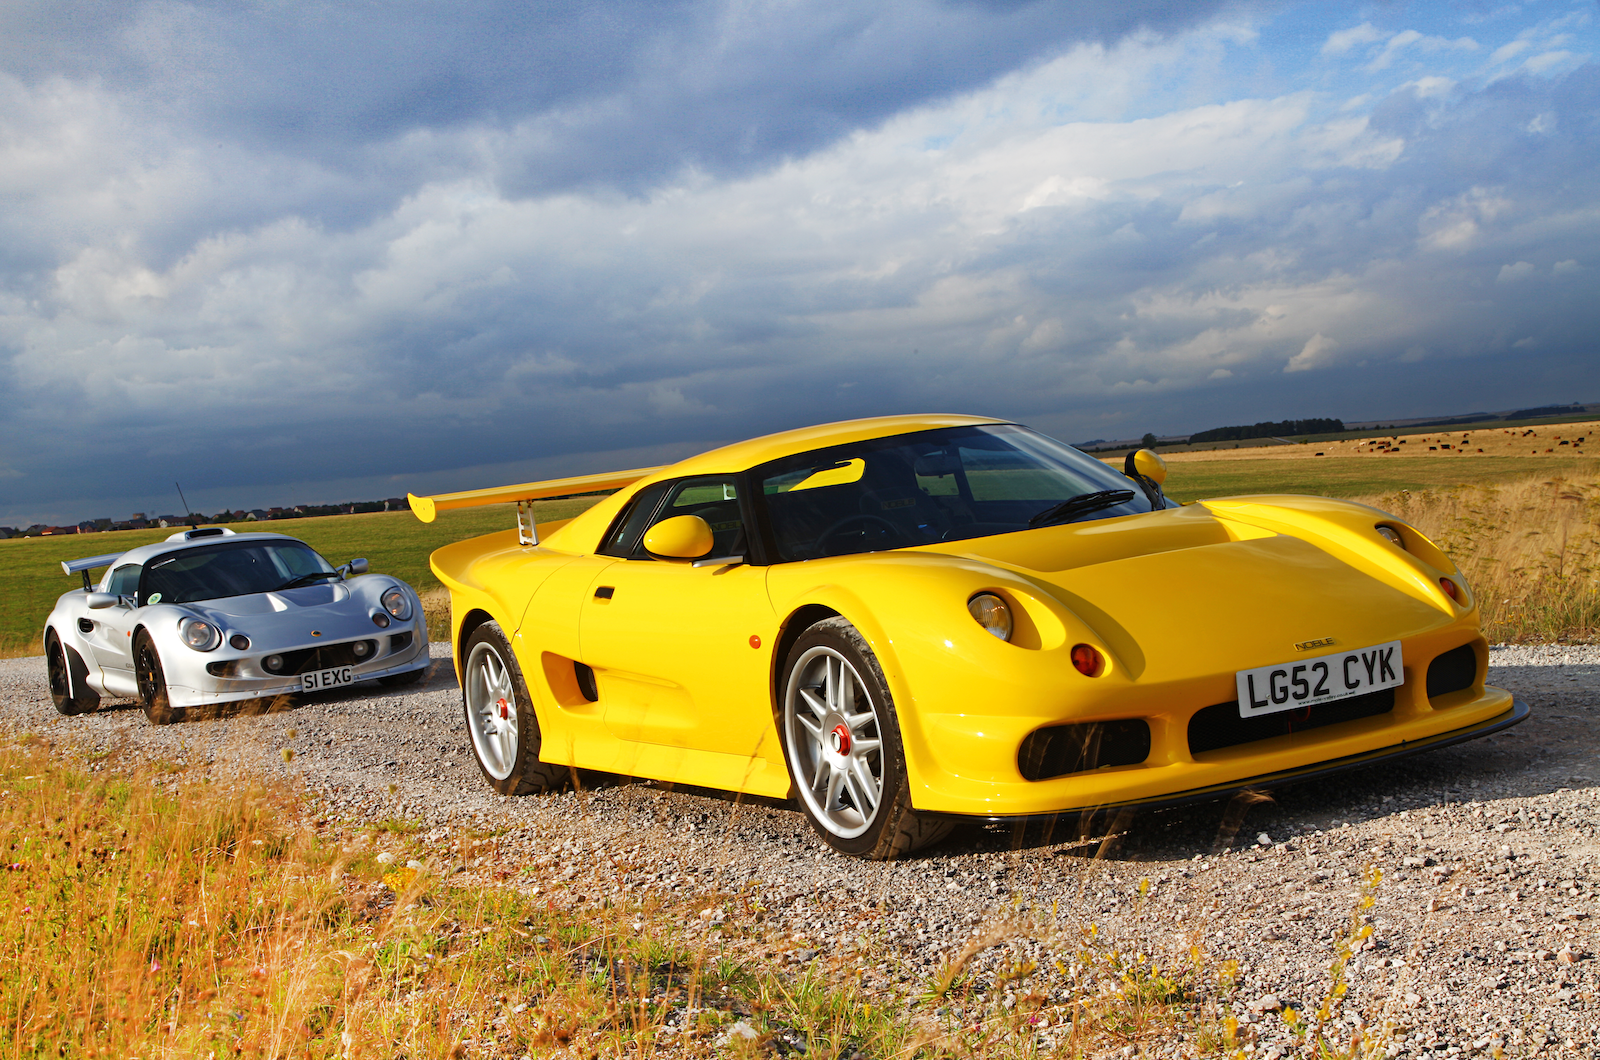 Classic & Sports Car - Flyweight driving icons - Lotus Exige vs Noble M12